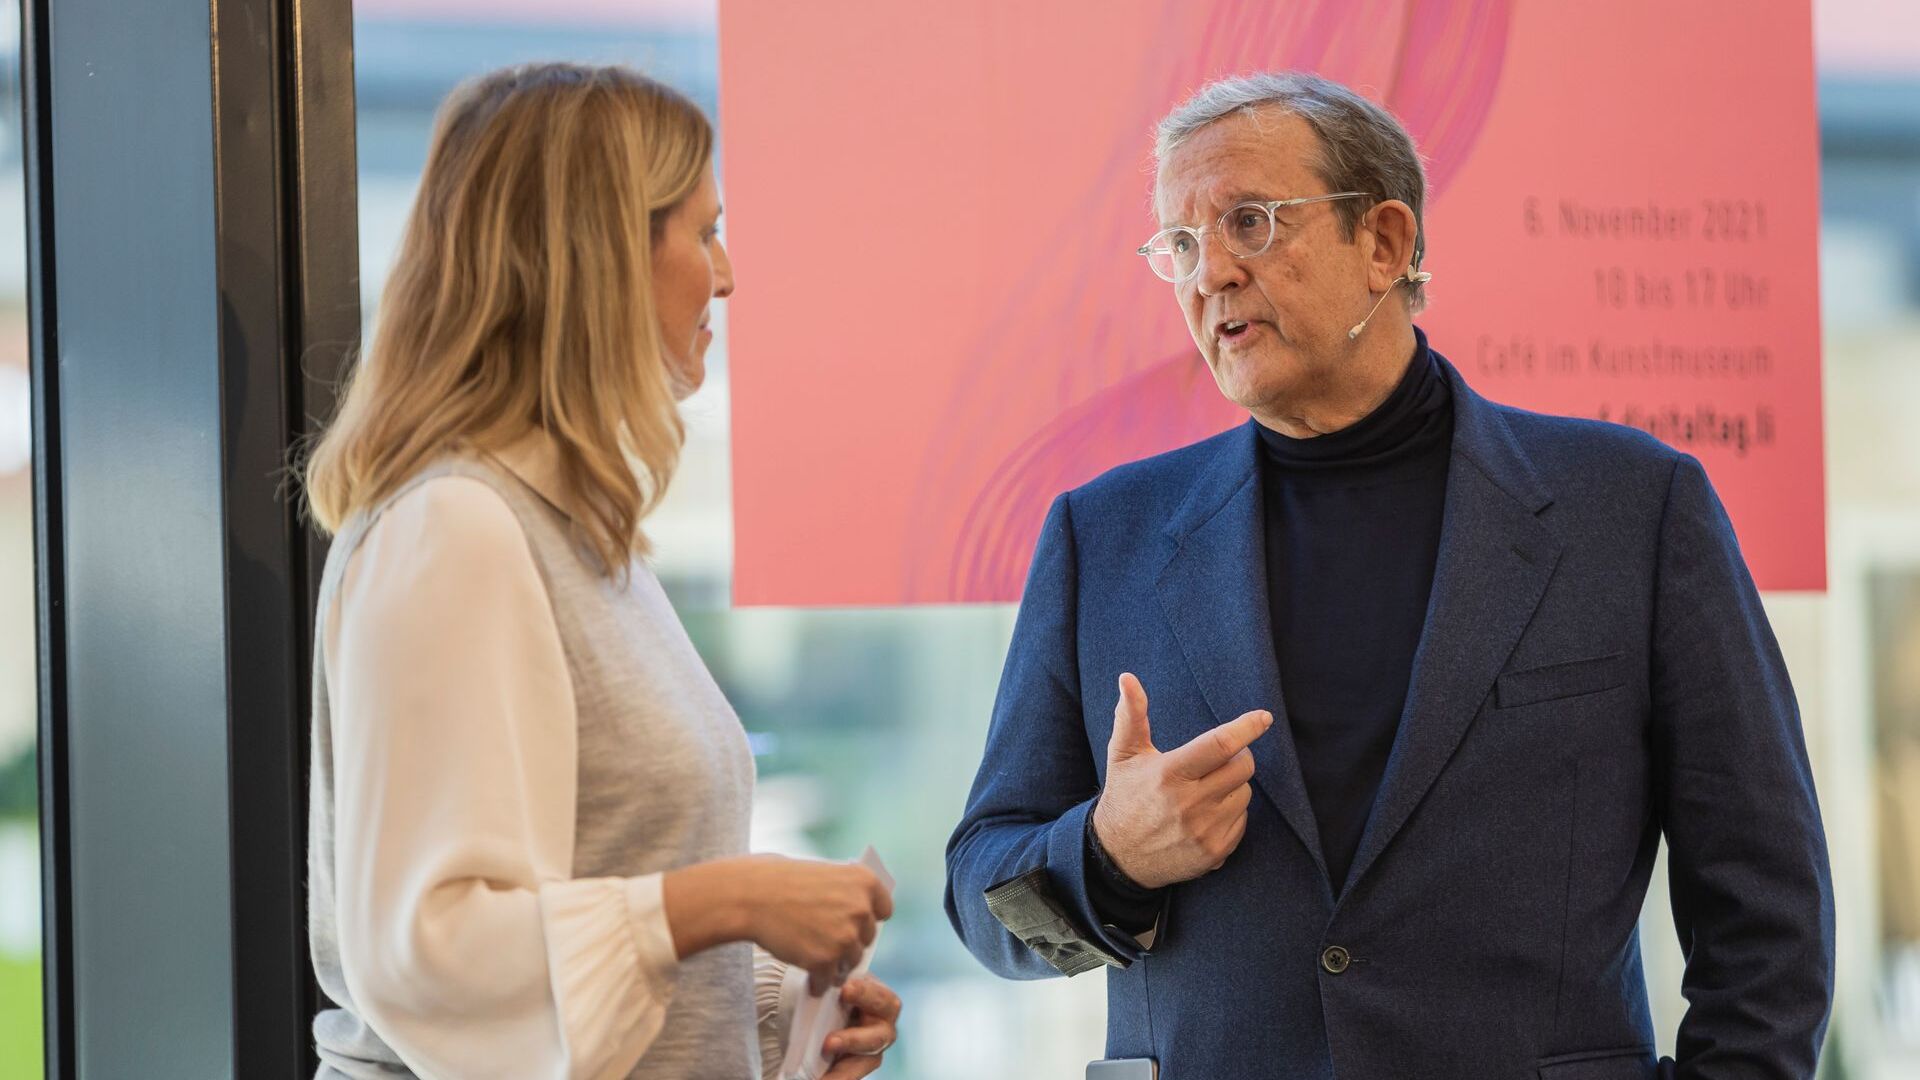 The "Digitaltag Vaduz" was welcomed by the Kunstmuseum of the capital of the Principality of Liechtenstein on Saturday 6 November 2021: the speech by Fritz Kaiser, Chairman and owner of Kaiser Partner